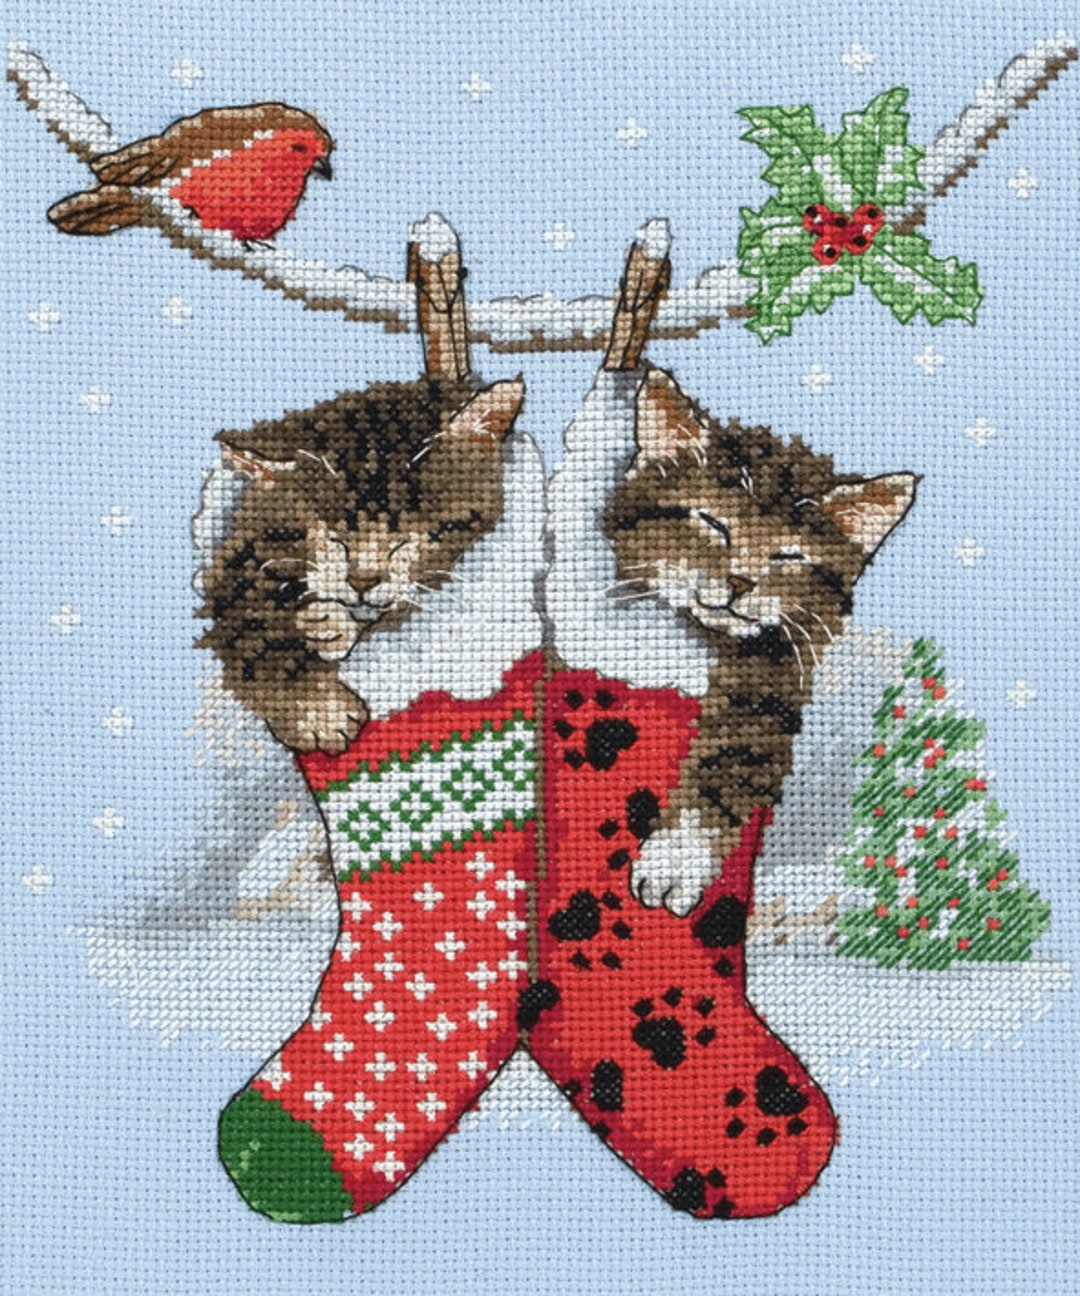 The New Berlin Co. (Kits for Kids) Cat In Stocking Cross Stitch